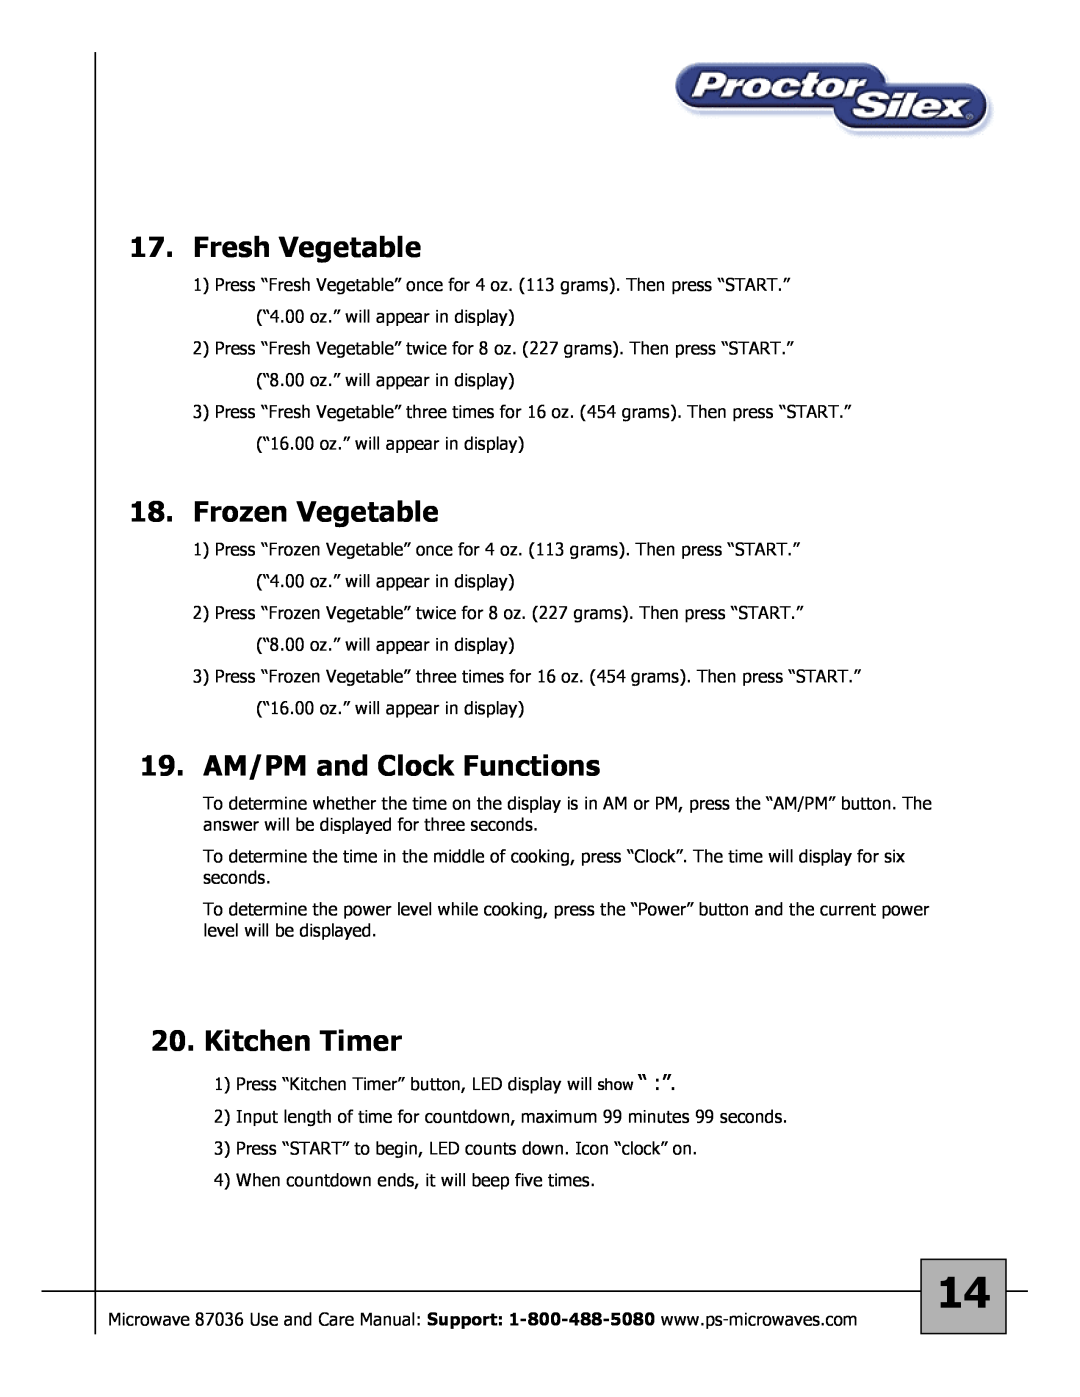 Proctor-Silex 87036 owner manual Fresh Vegetable, Frozen Vegetable, 19.AM/PM and Clock Functions, Kitchen Timer 